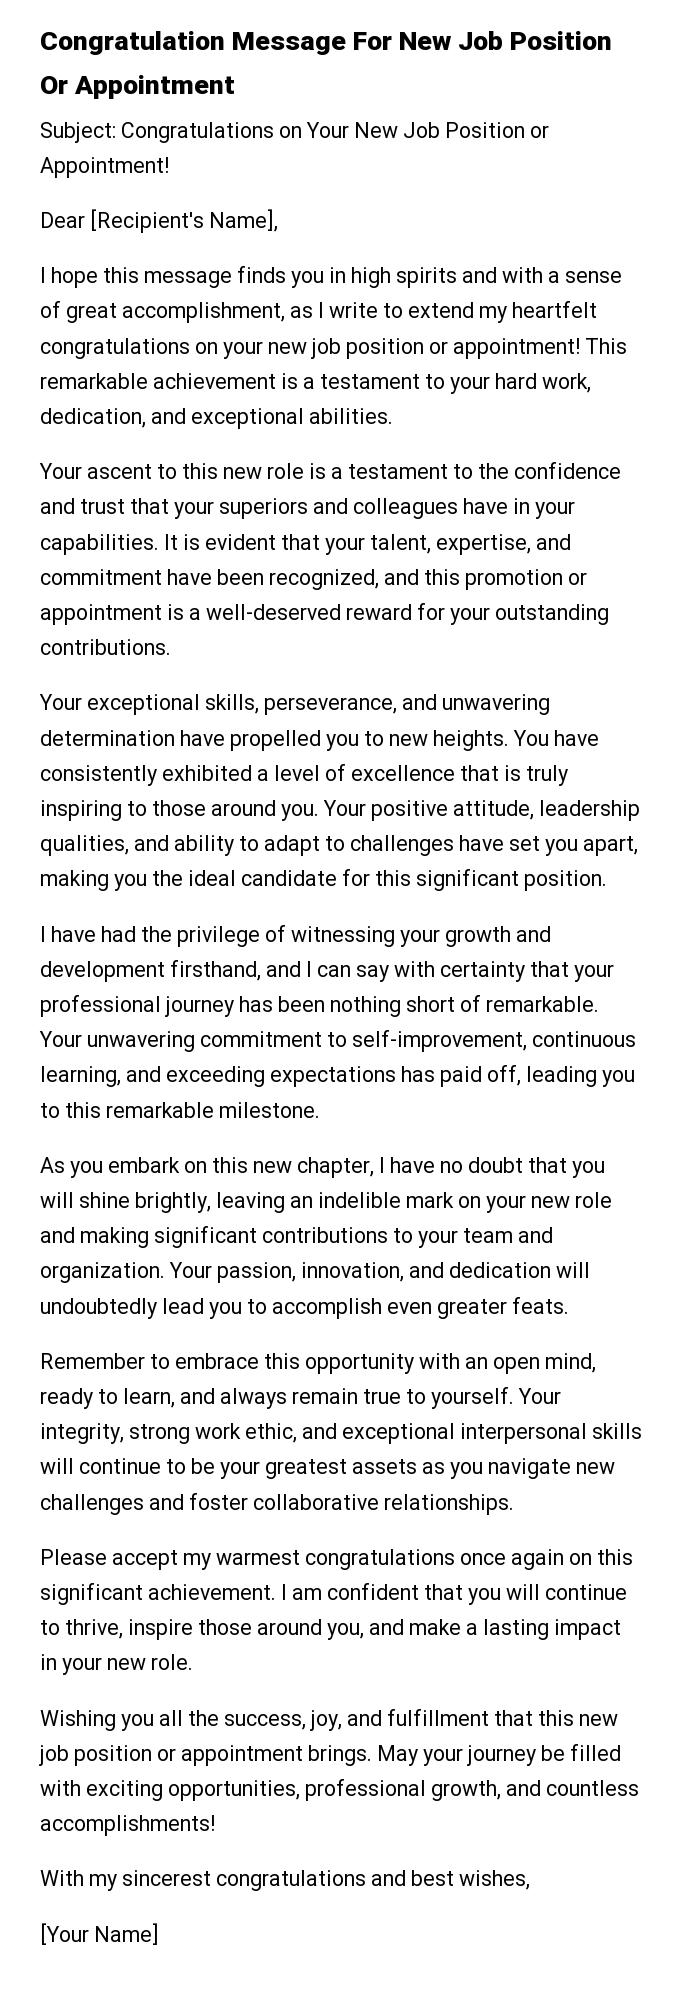 Congratulation Message For New Job Position Or Appointment